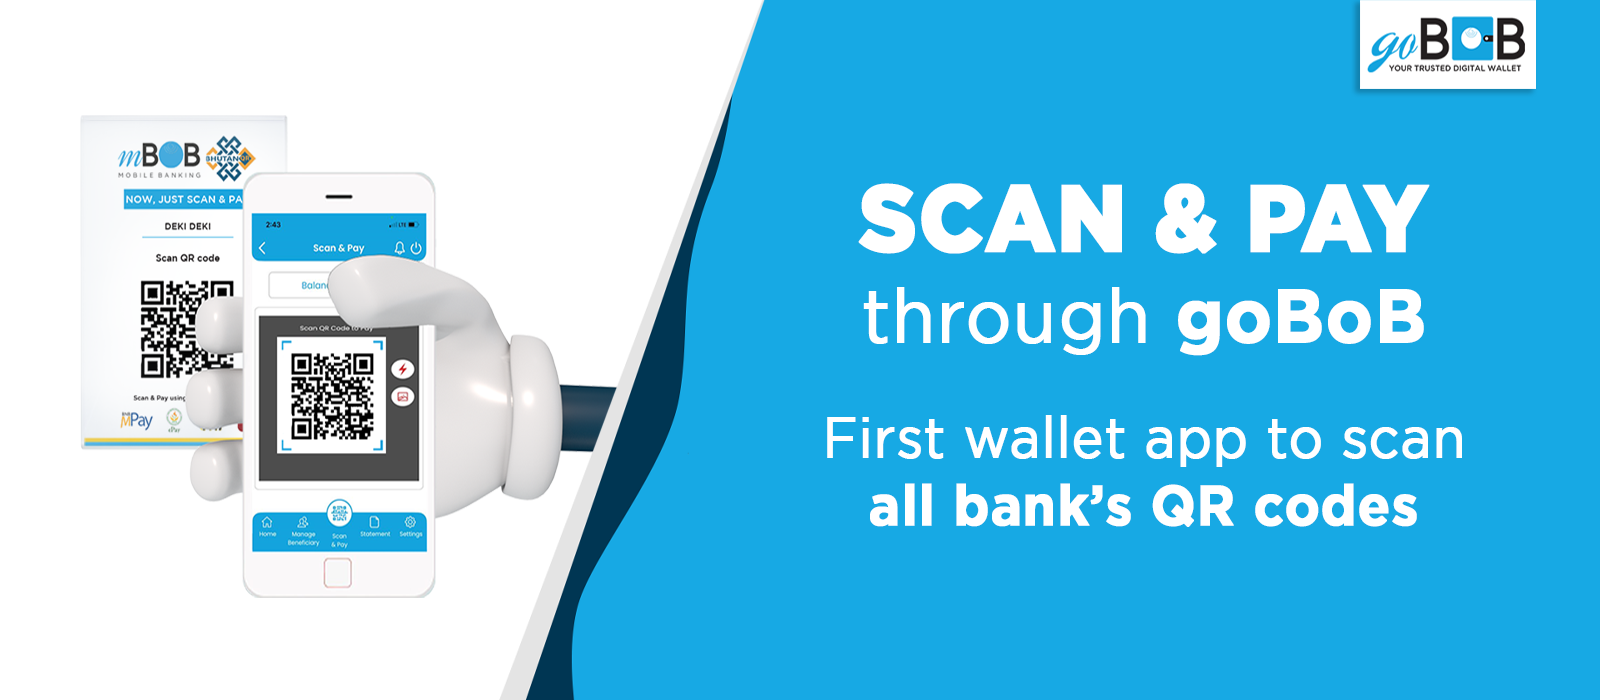 Scan & pay banner